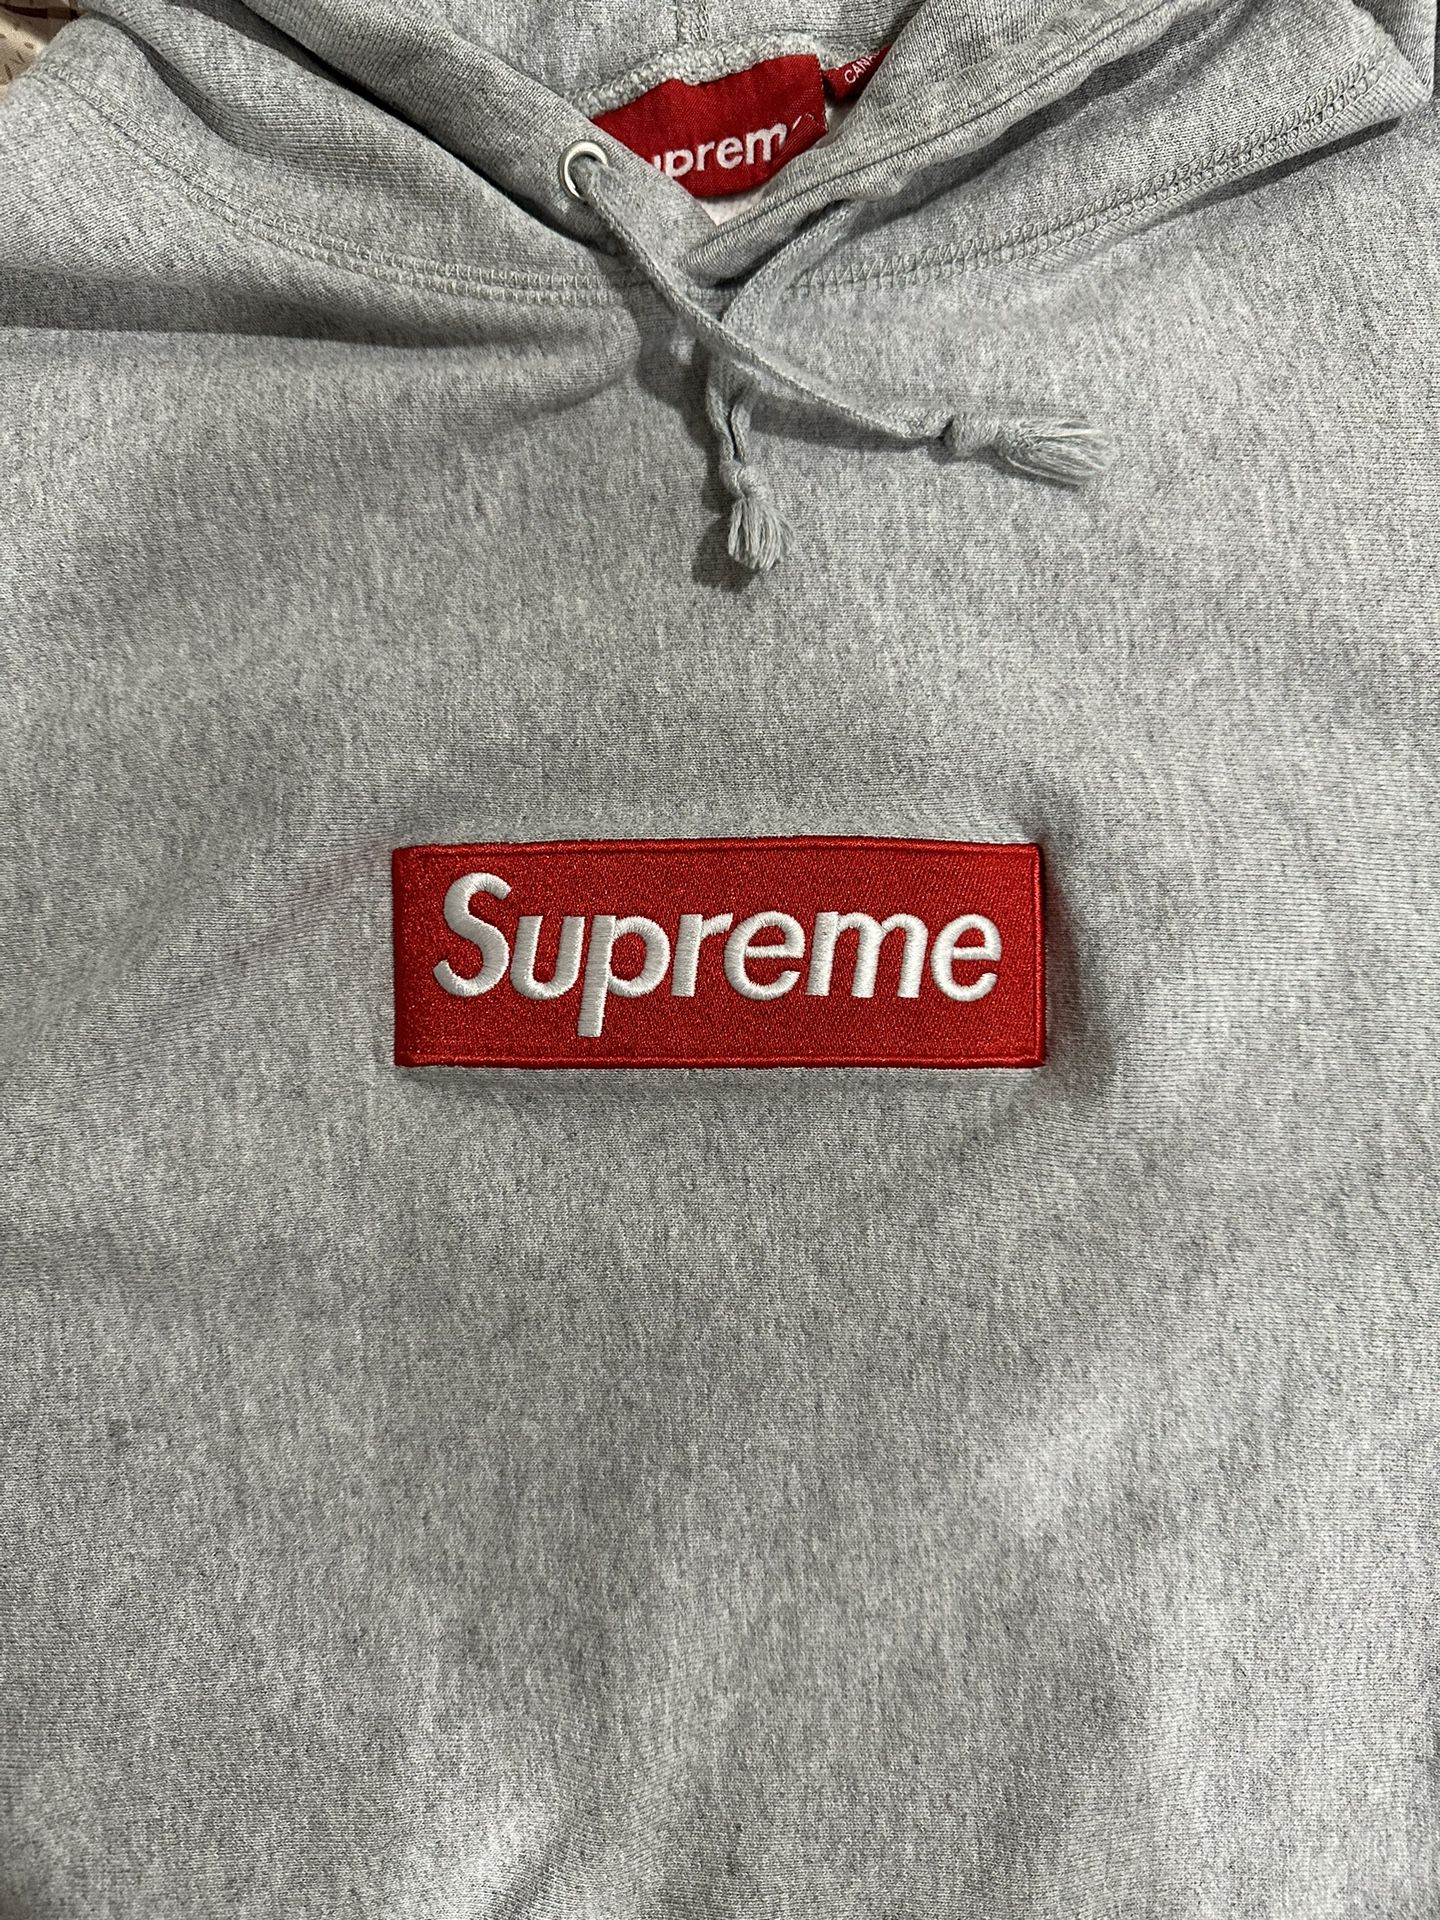 Supreme Box logo Hoodie for Sale in Brooklyn, NY - OfferUp